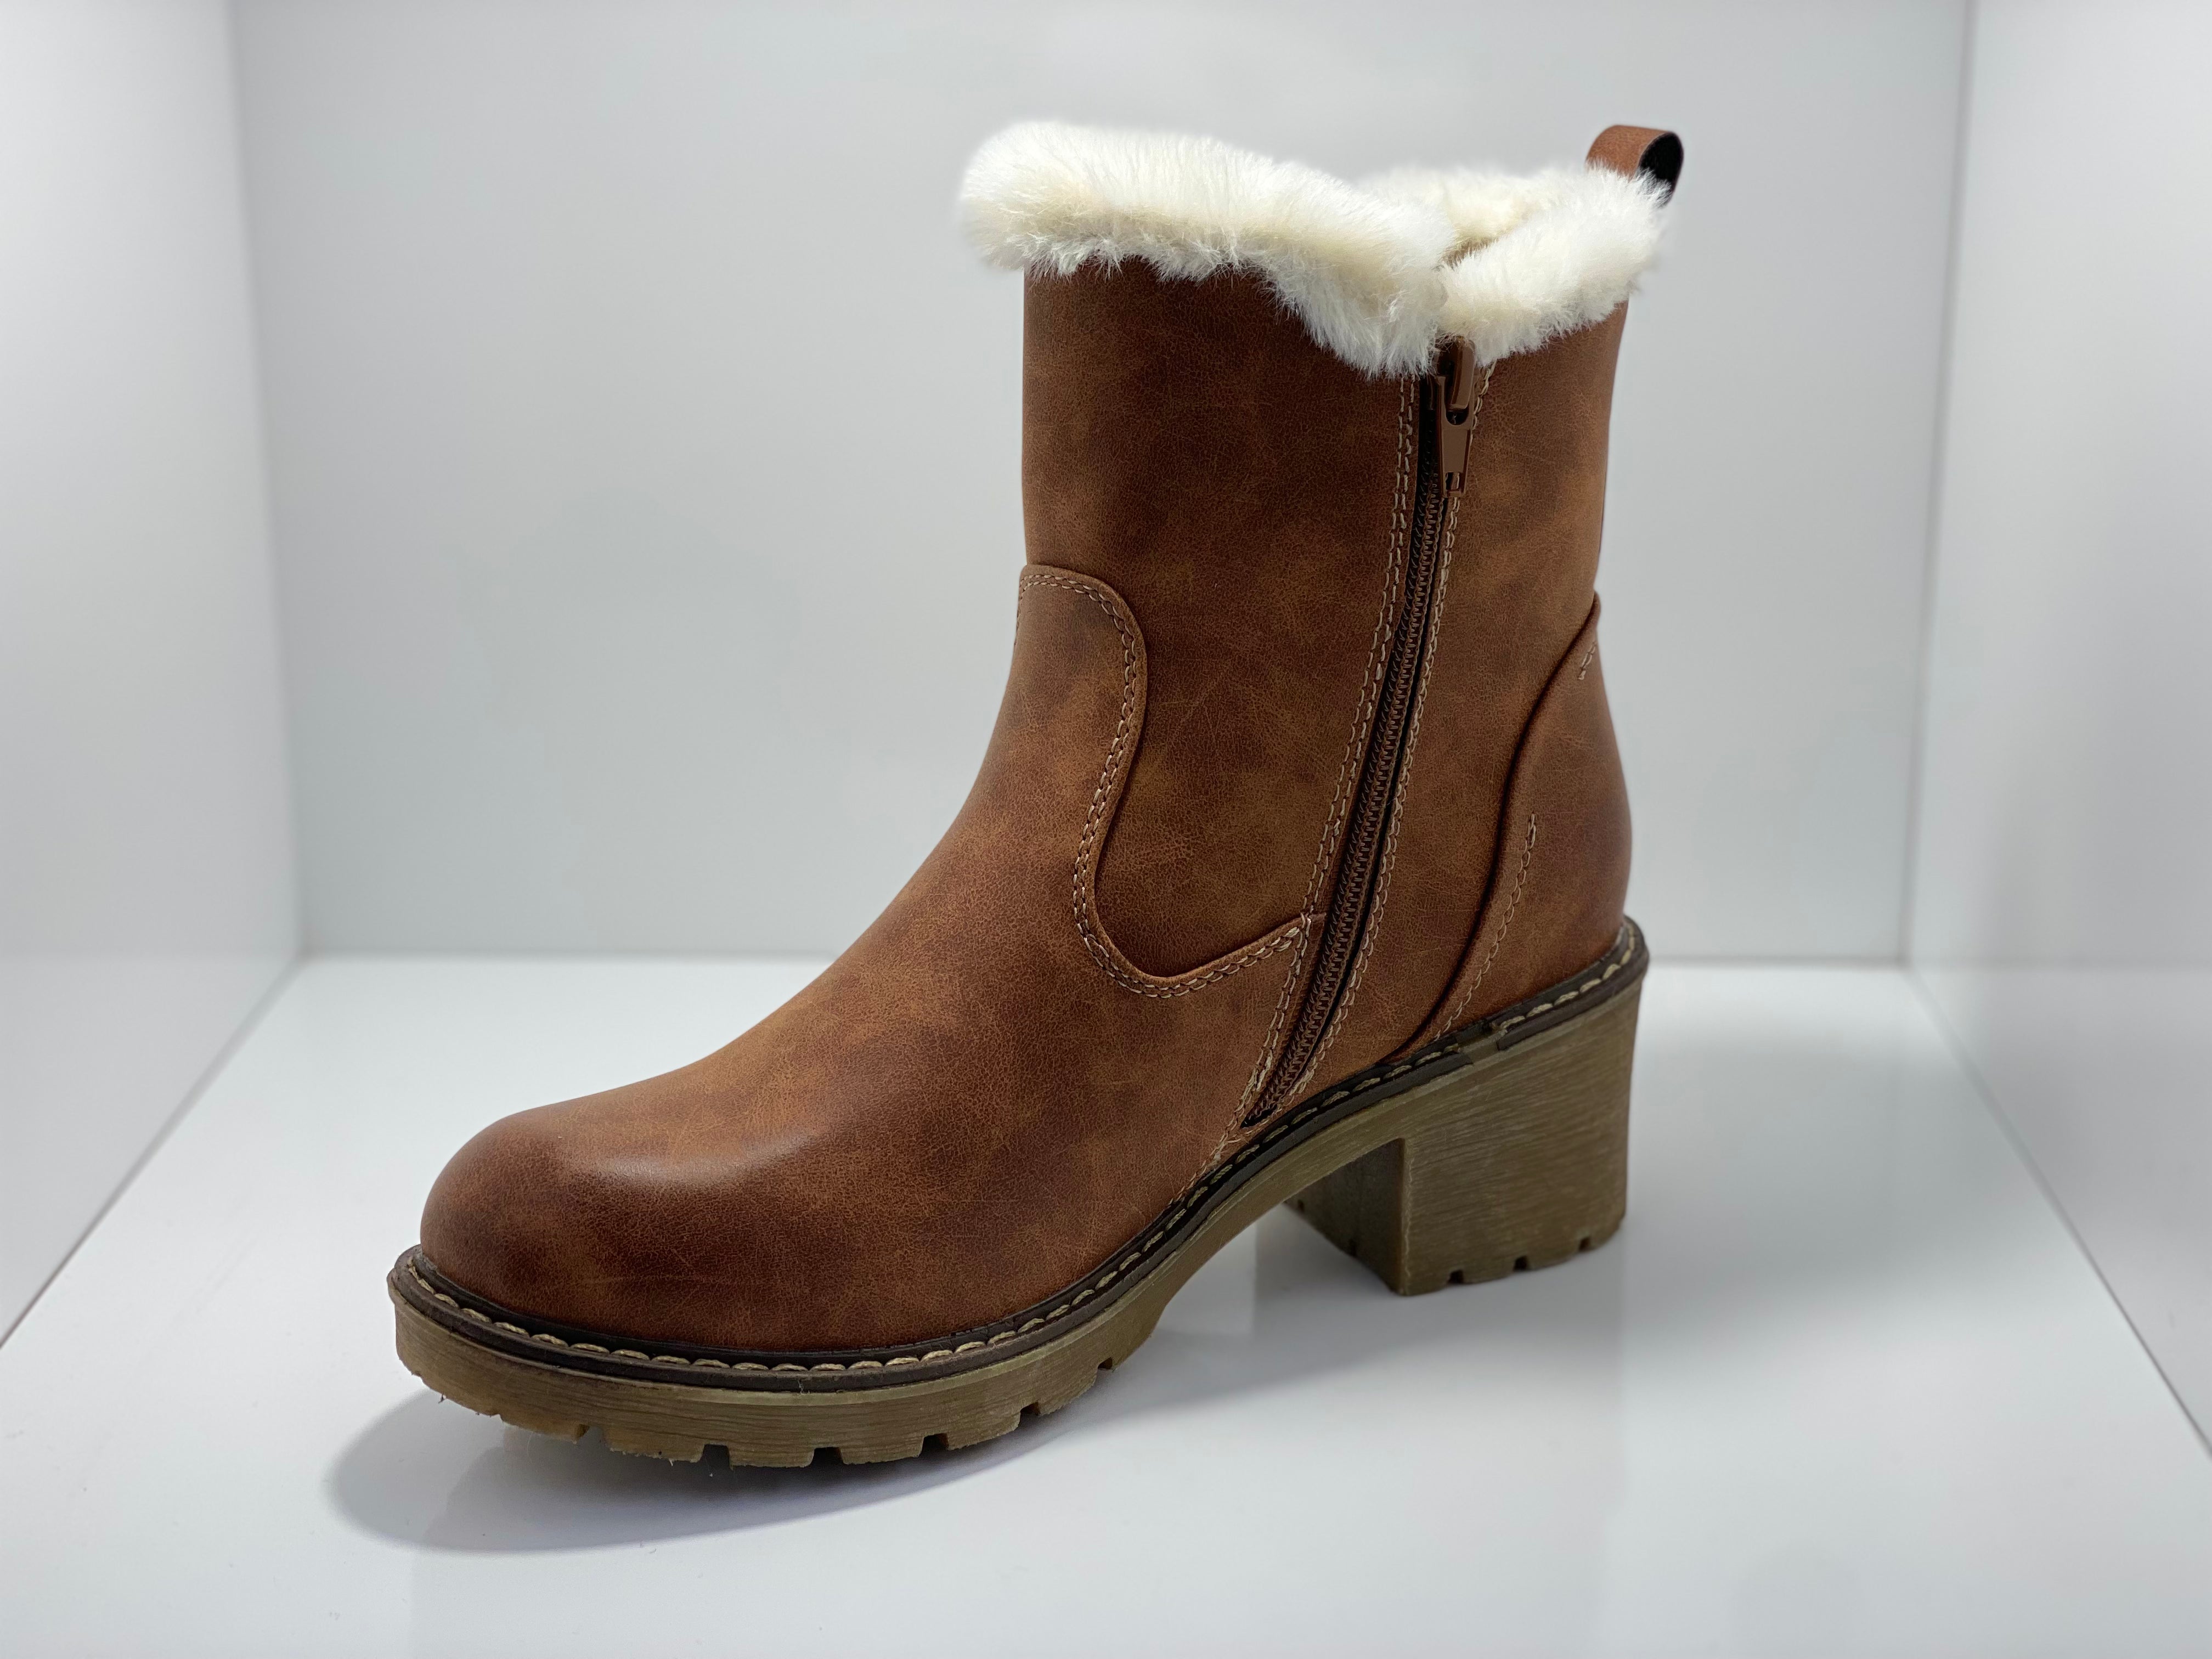 Elin Fur Lined Cleated Sole Boot